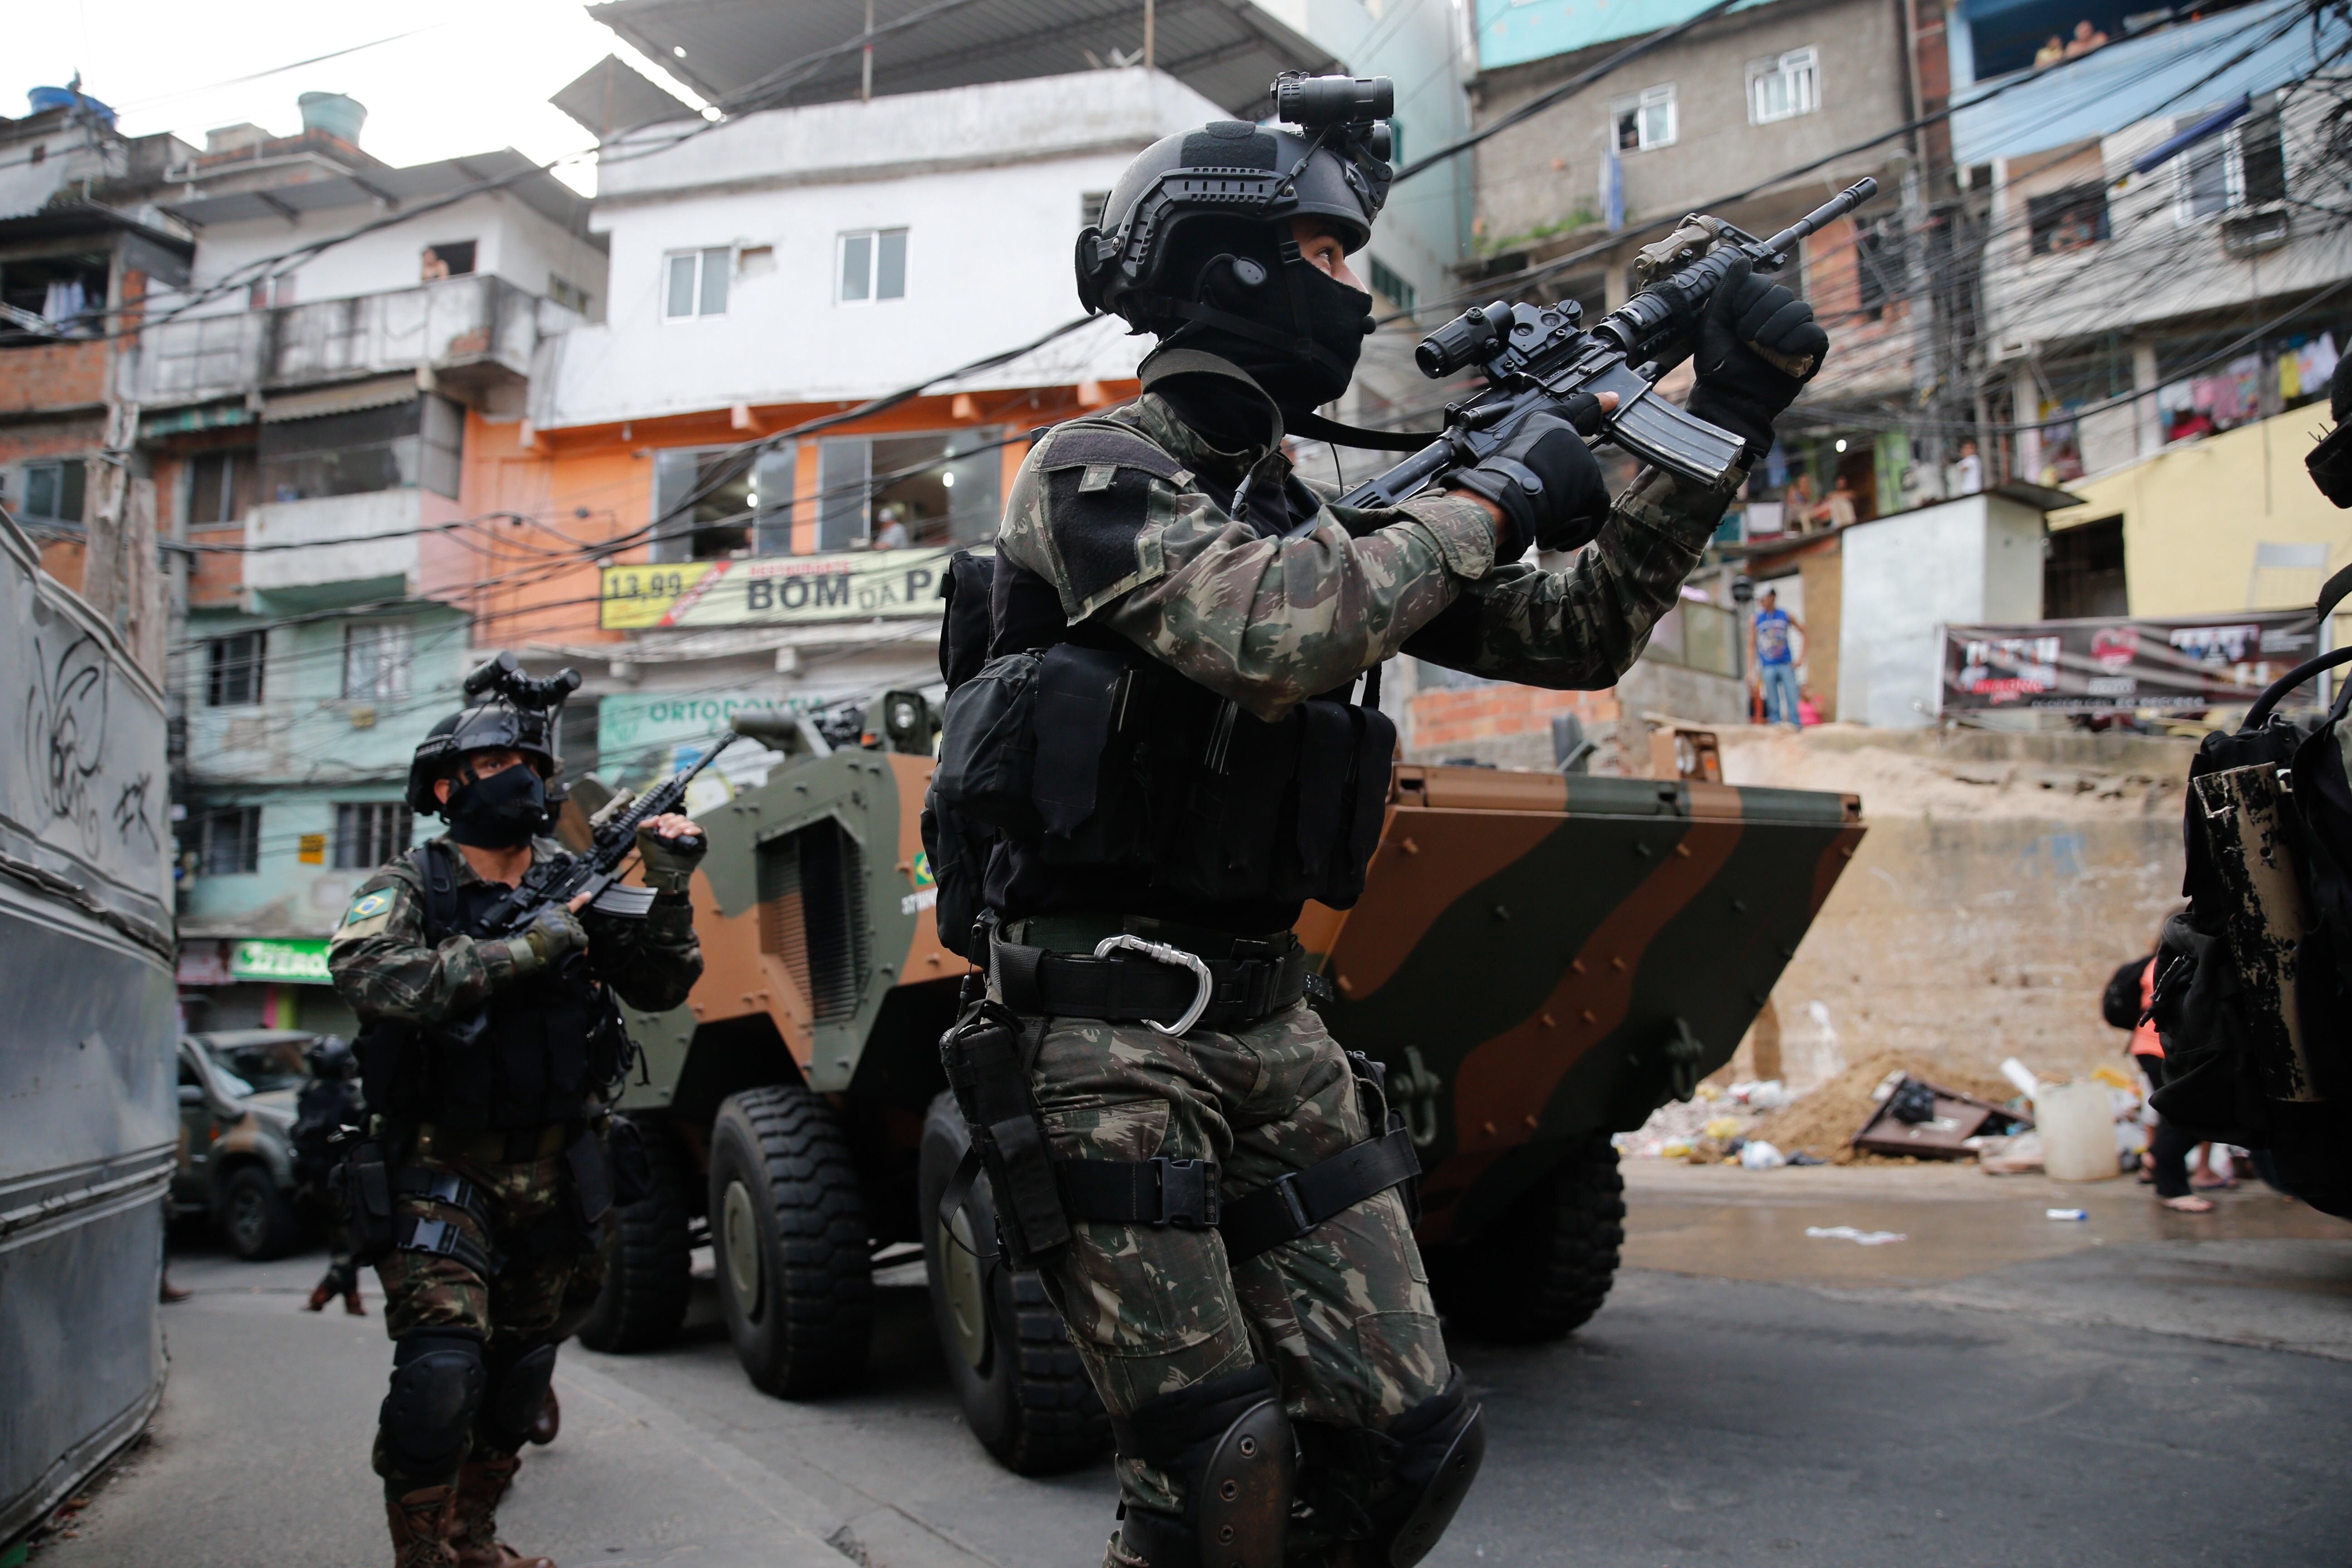 Brazilian Army Entering The Rocinha Favela With An Armored Personnel Carrier Called Guarani (VBTP MR). 5184 X 3456. Military, Special Forces, Military Picture